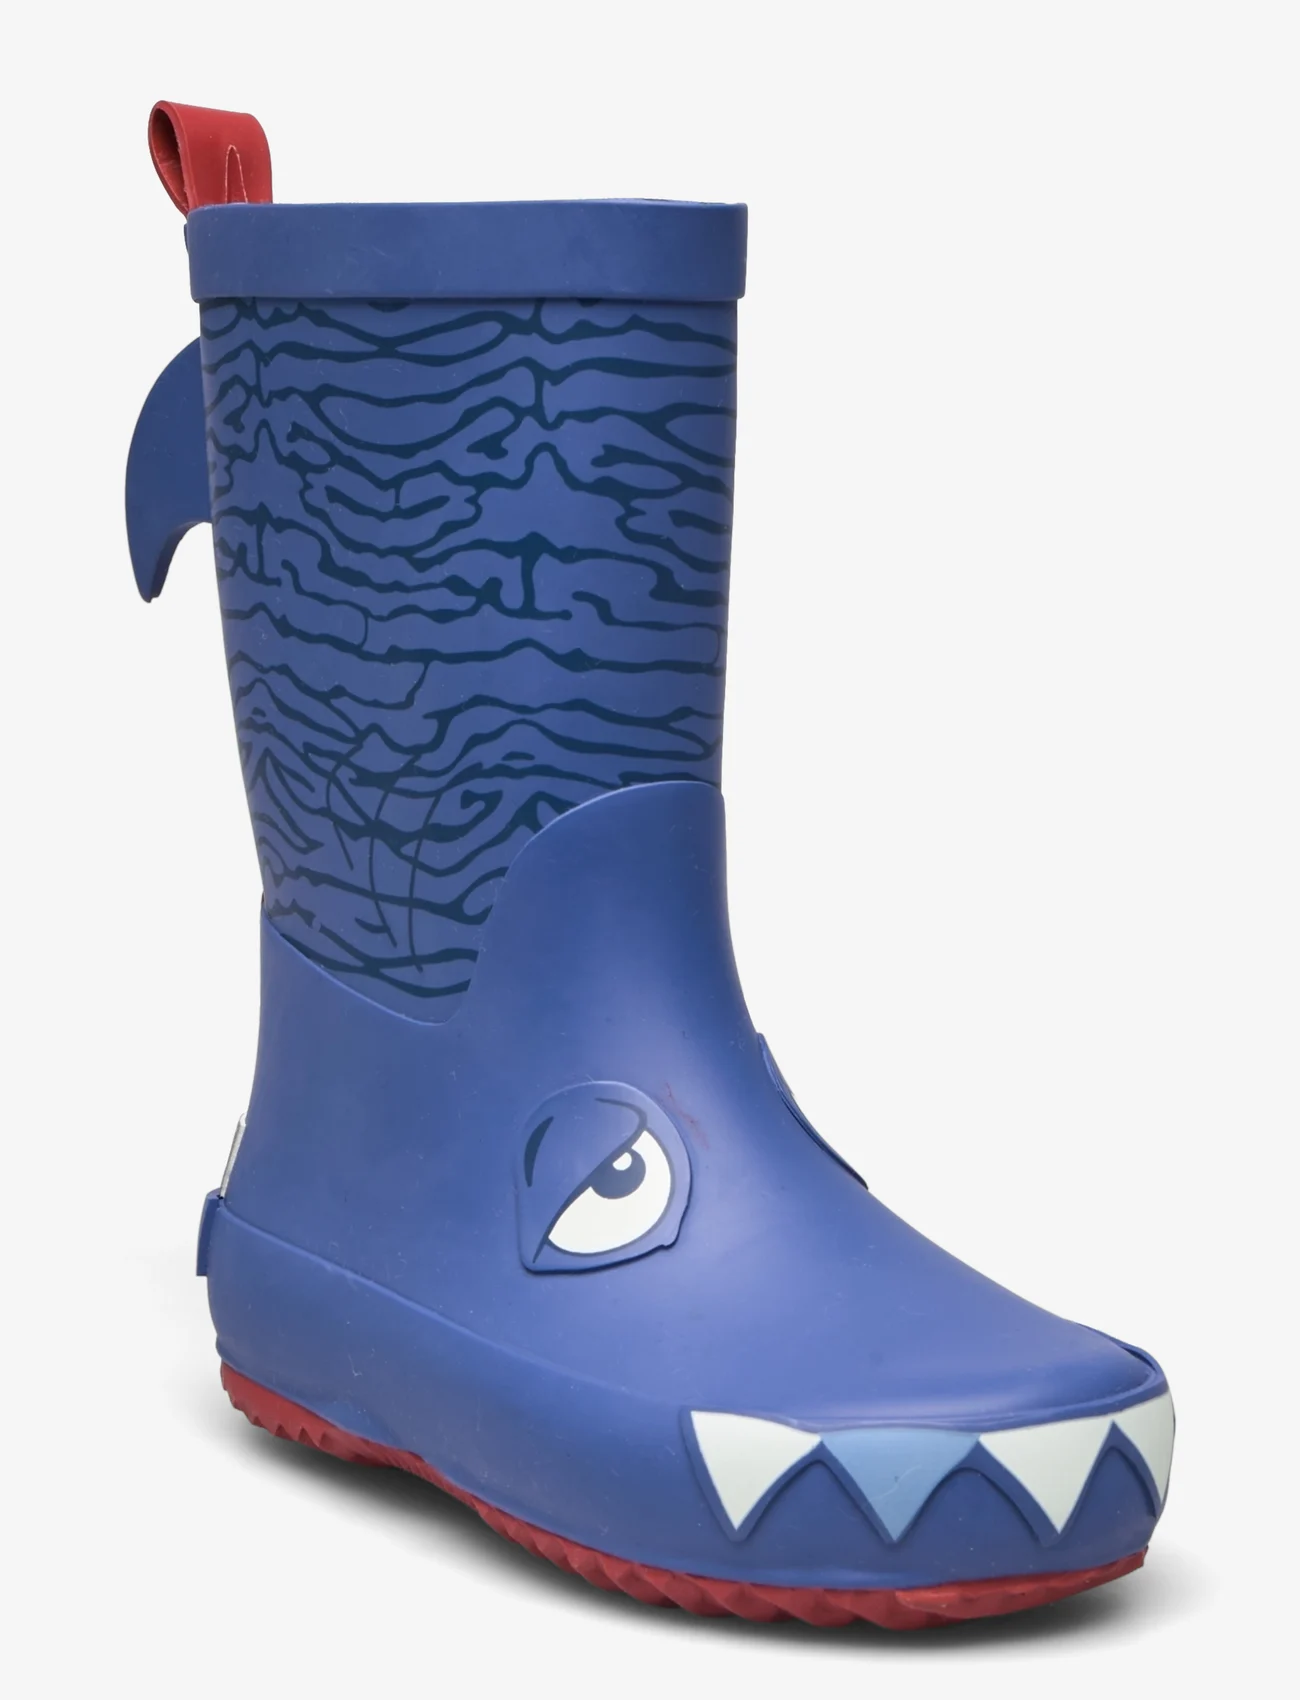 CeLaVi - Wellies - Shark - unlined rubberboots - federal blue - 0